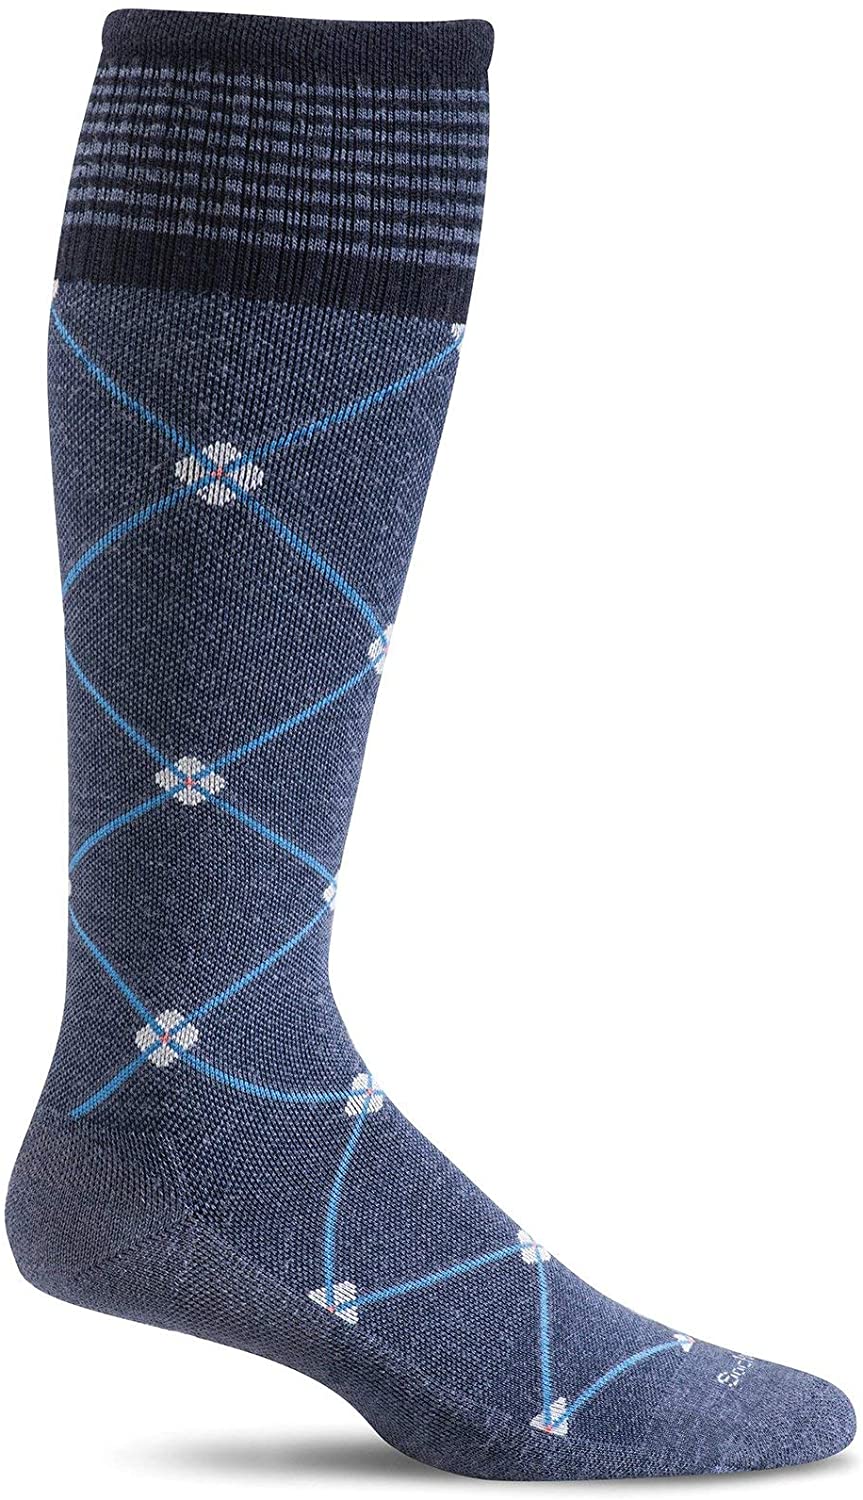 Sockwell Women's Elevation Sock in Denim color from the side